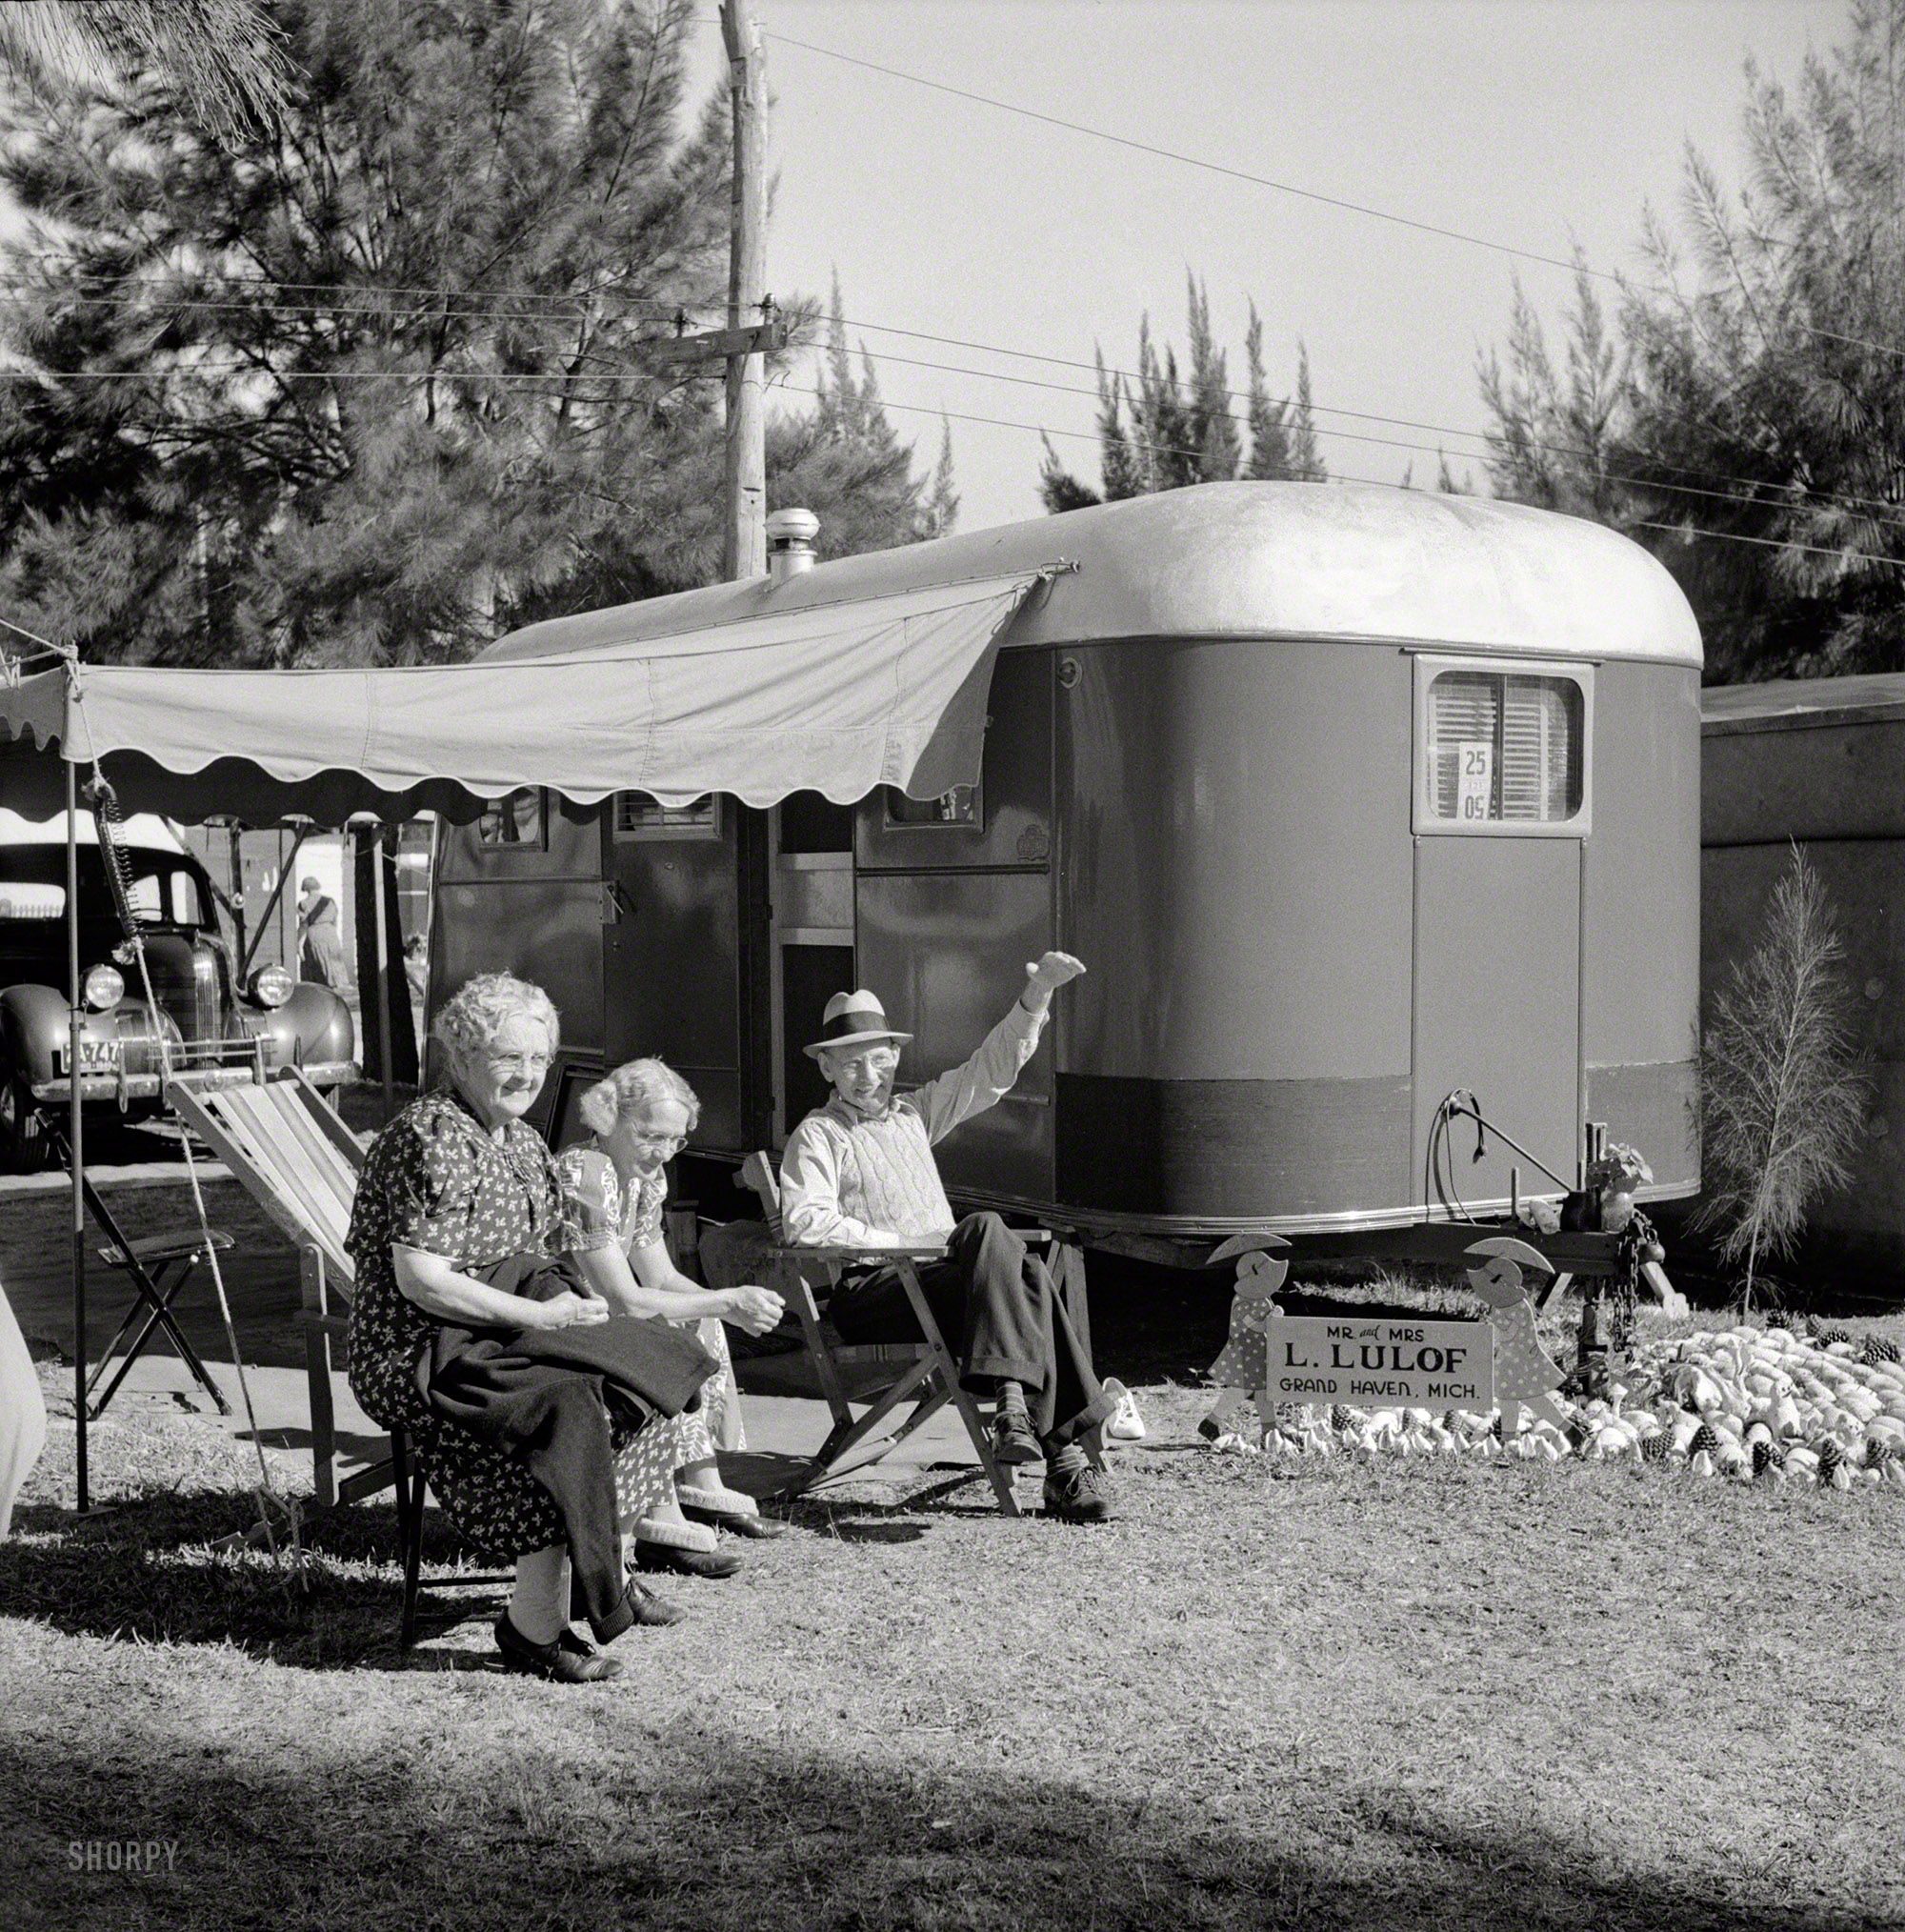 January 1941. "Guests at Sarasota, Florida, trailer park." Mr. and Mrs. L. Lulof of Grand Haven, Michigan. Photo by Marion Post Wolcott. View full size.